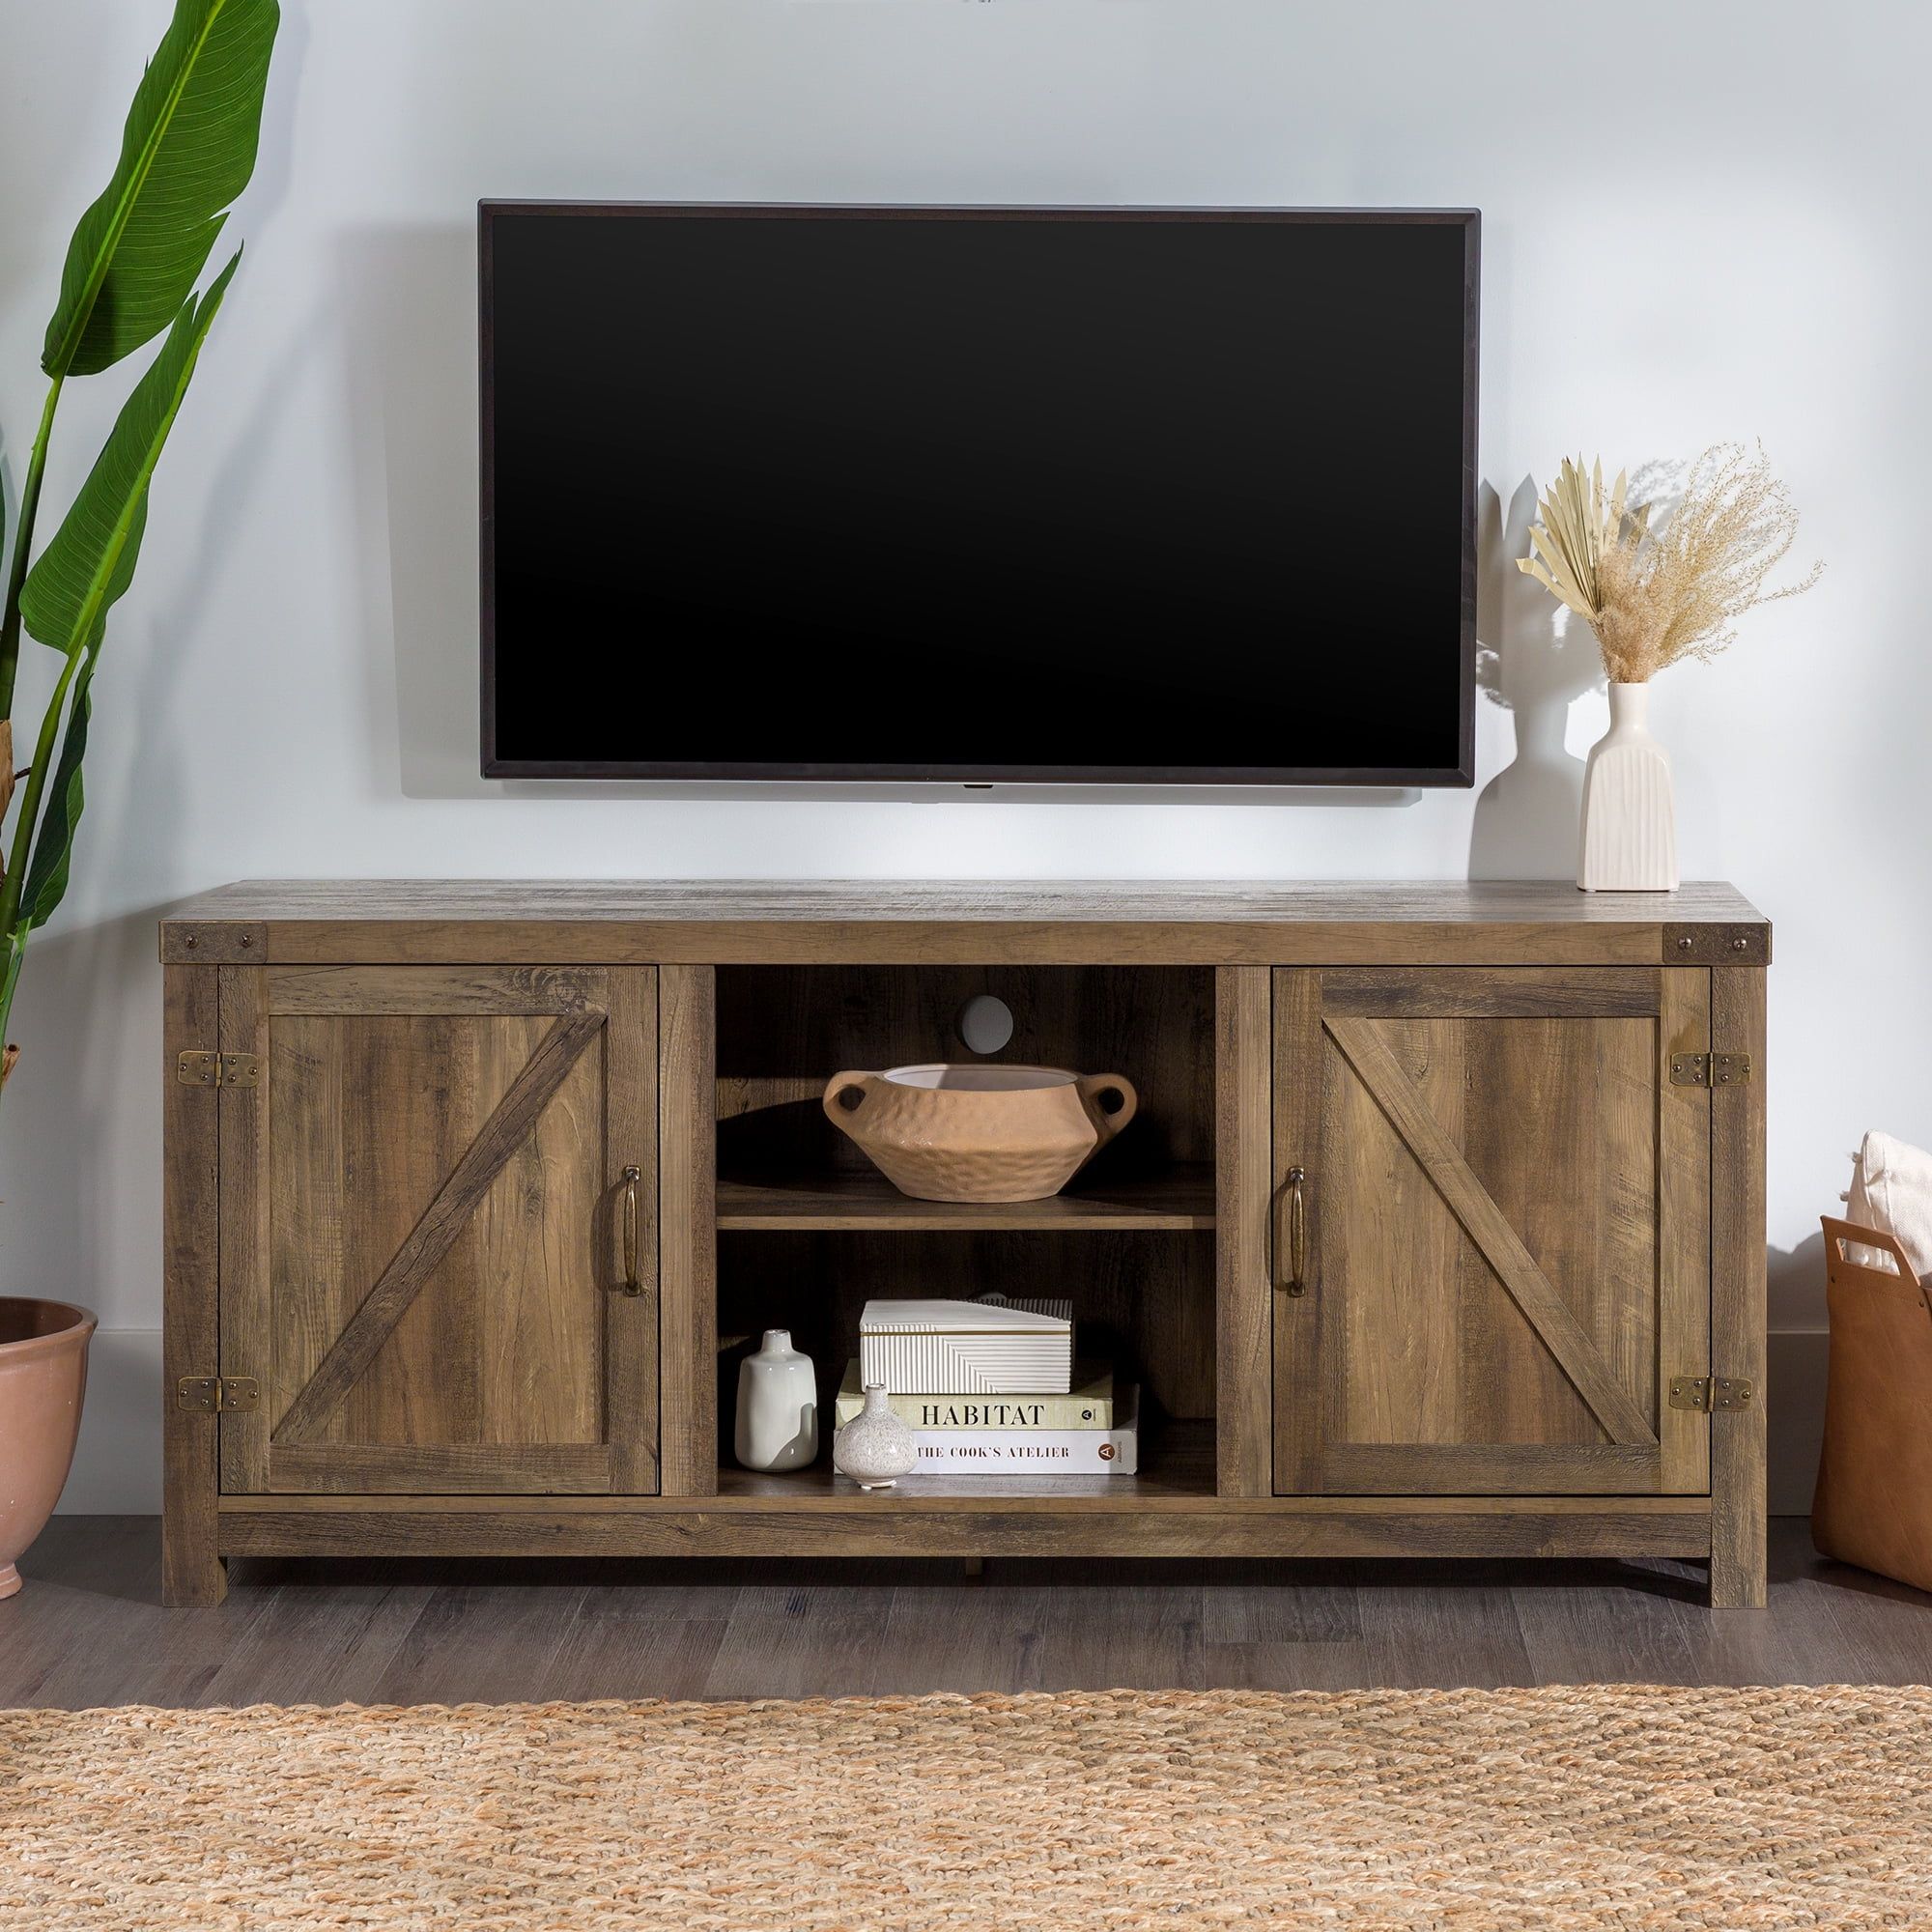 Woven Paths Modern Farmhouse Barn Door Tv Stand For Tvs Up To 65",  Reclaimed Barnwood – Walmart With Regard To Modern Farmhouse Barn Tv Stands (View 3 of 15)